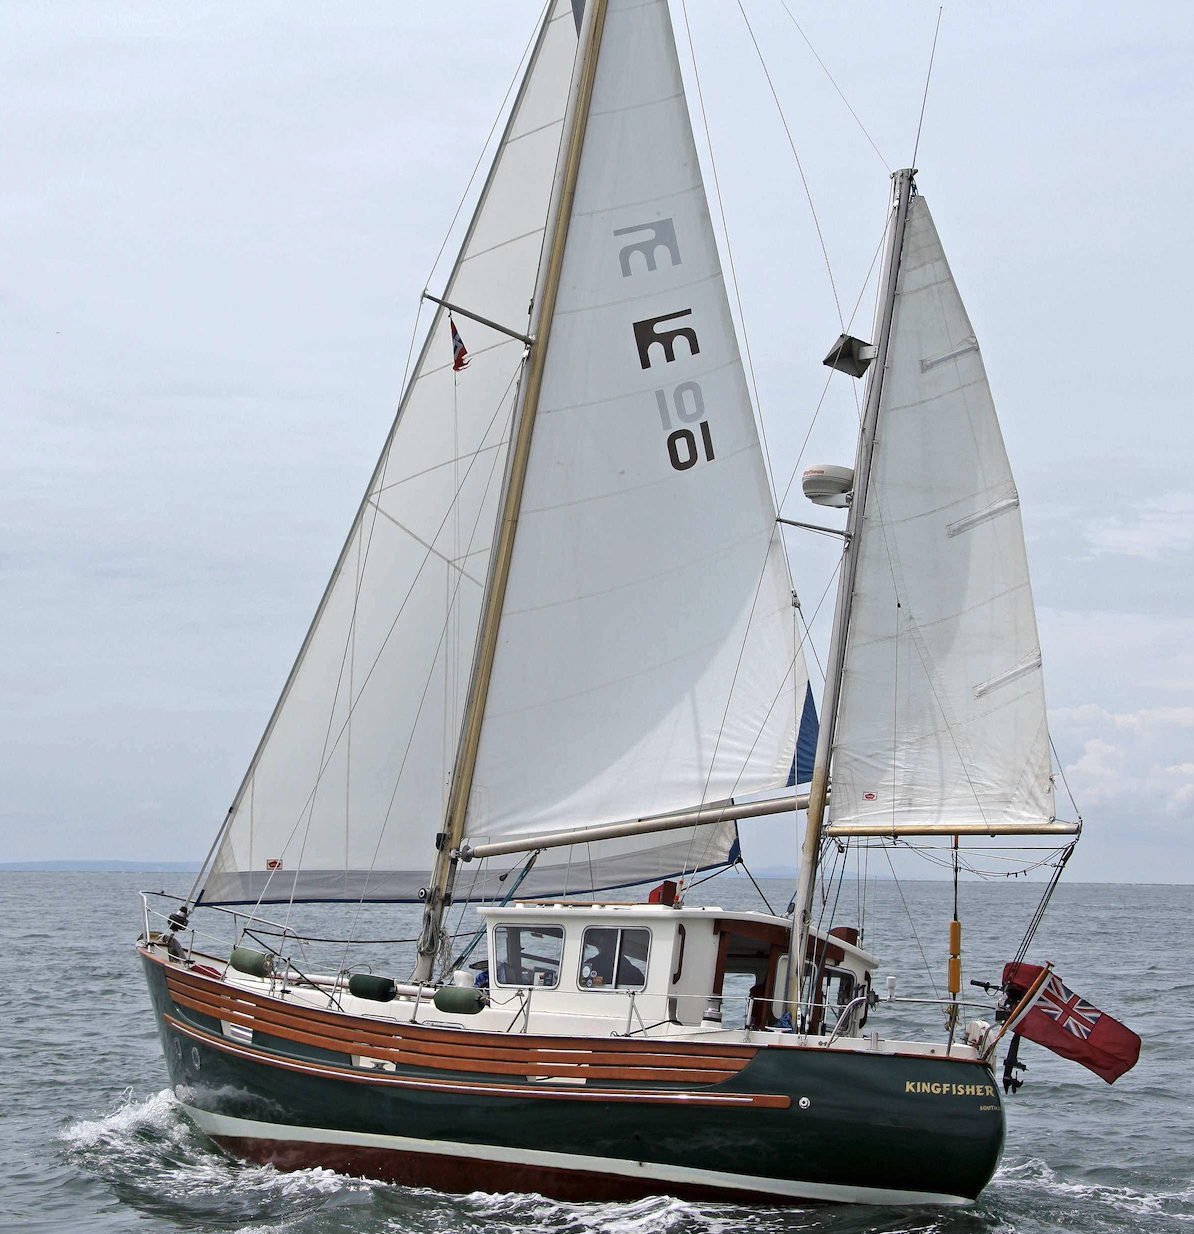 Fisher 34 - Kingfisher of Forton SOLD 